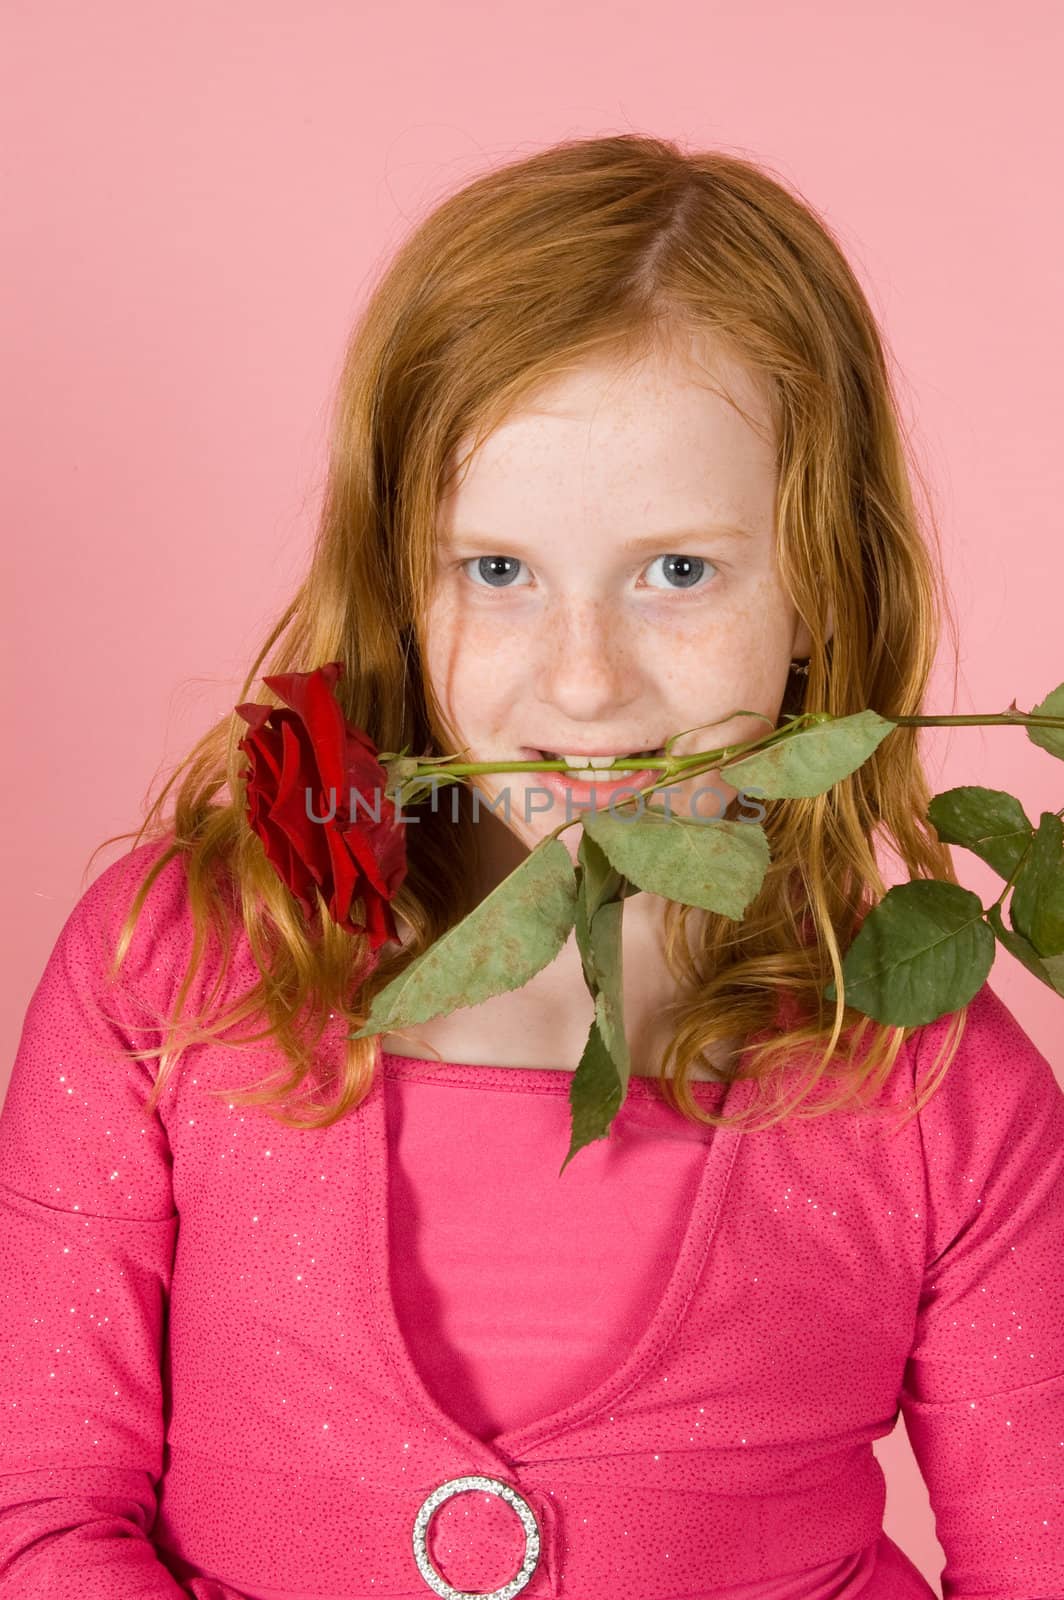 young girl is holding a red rose between her teeth by ladyminnie